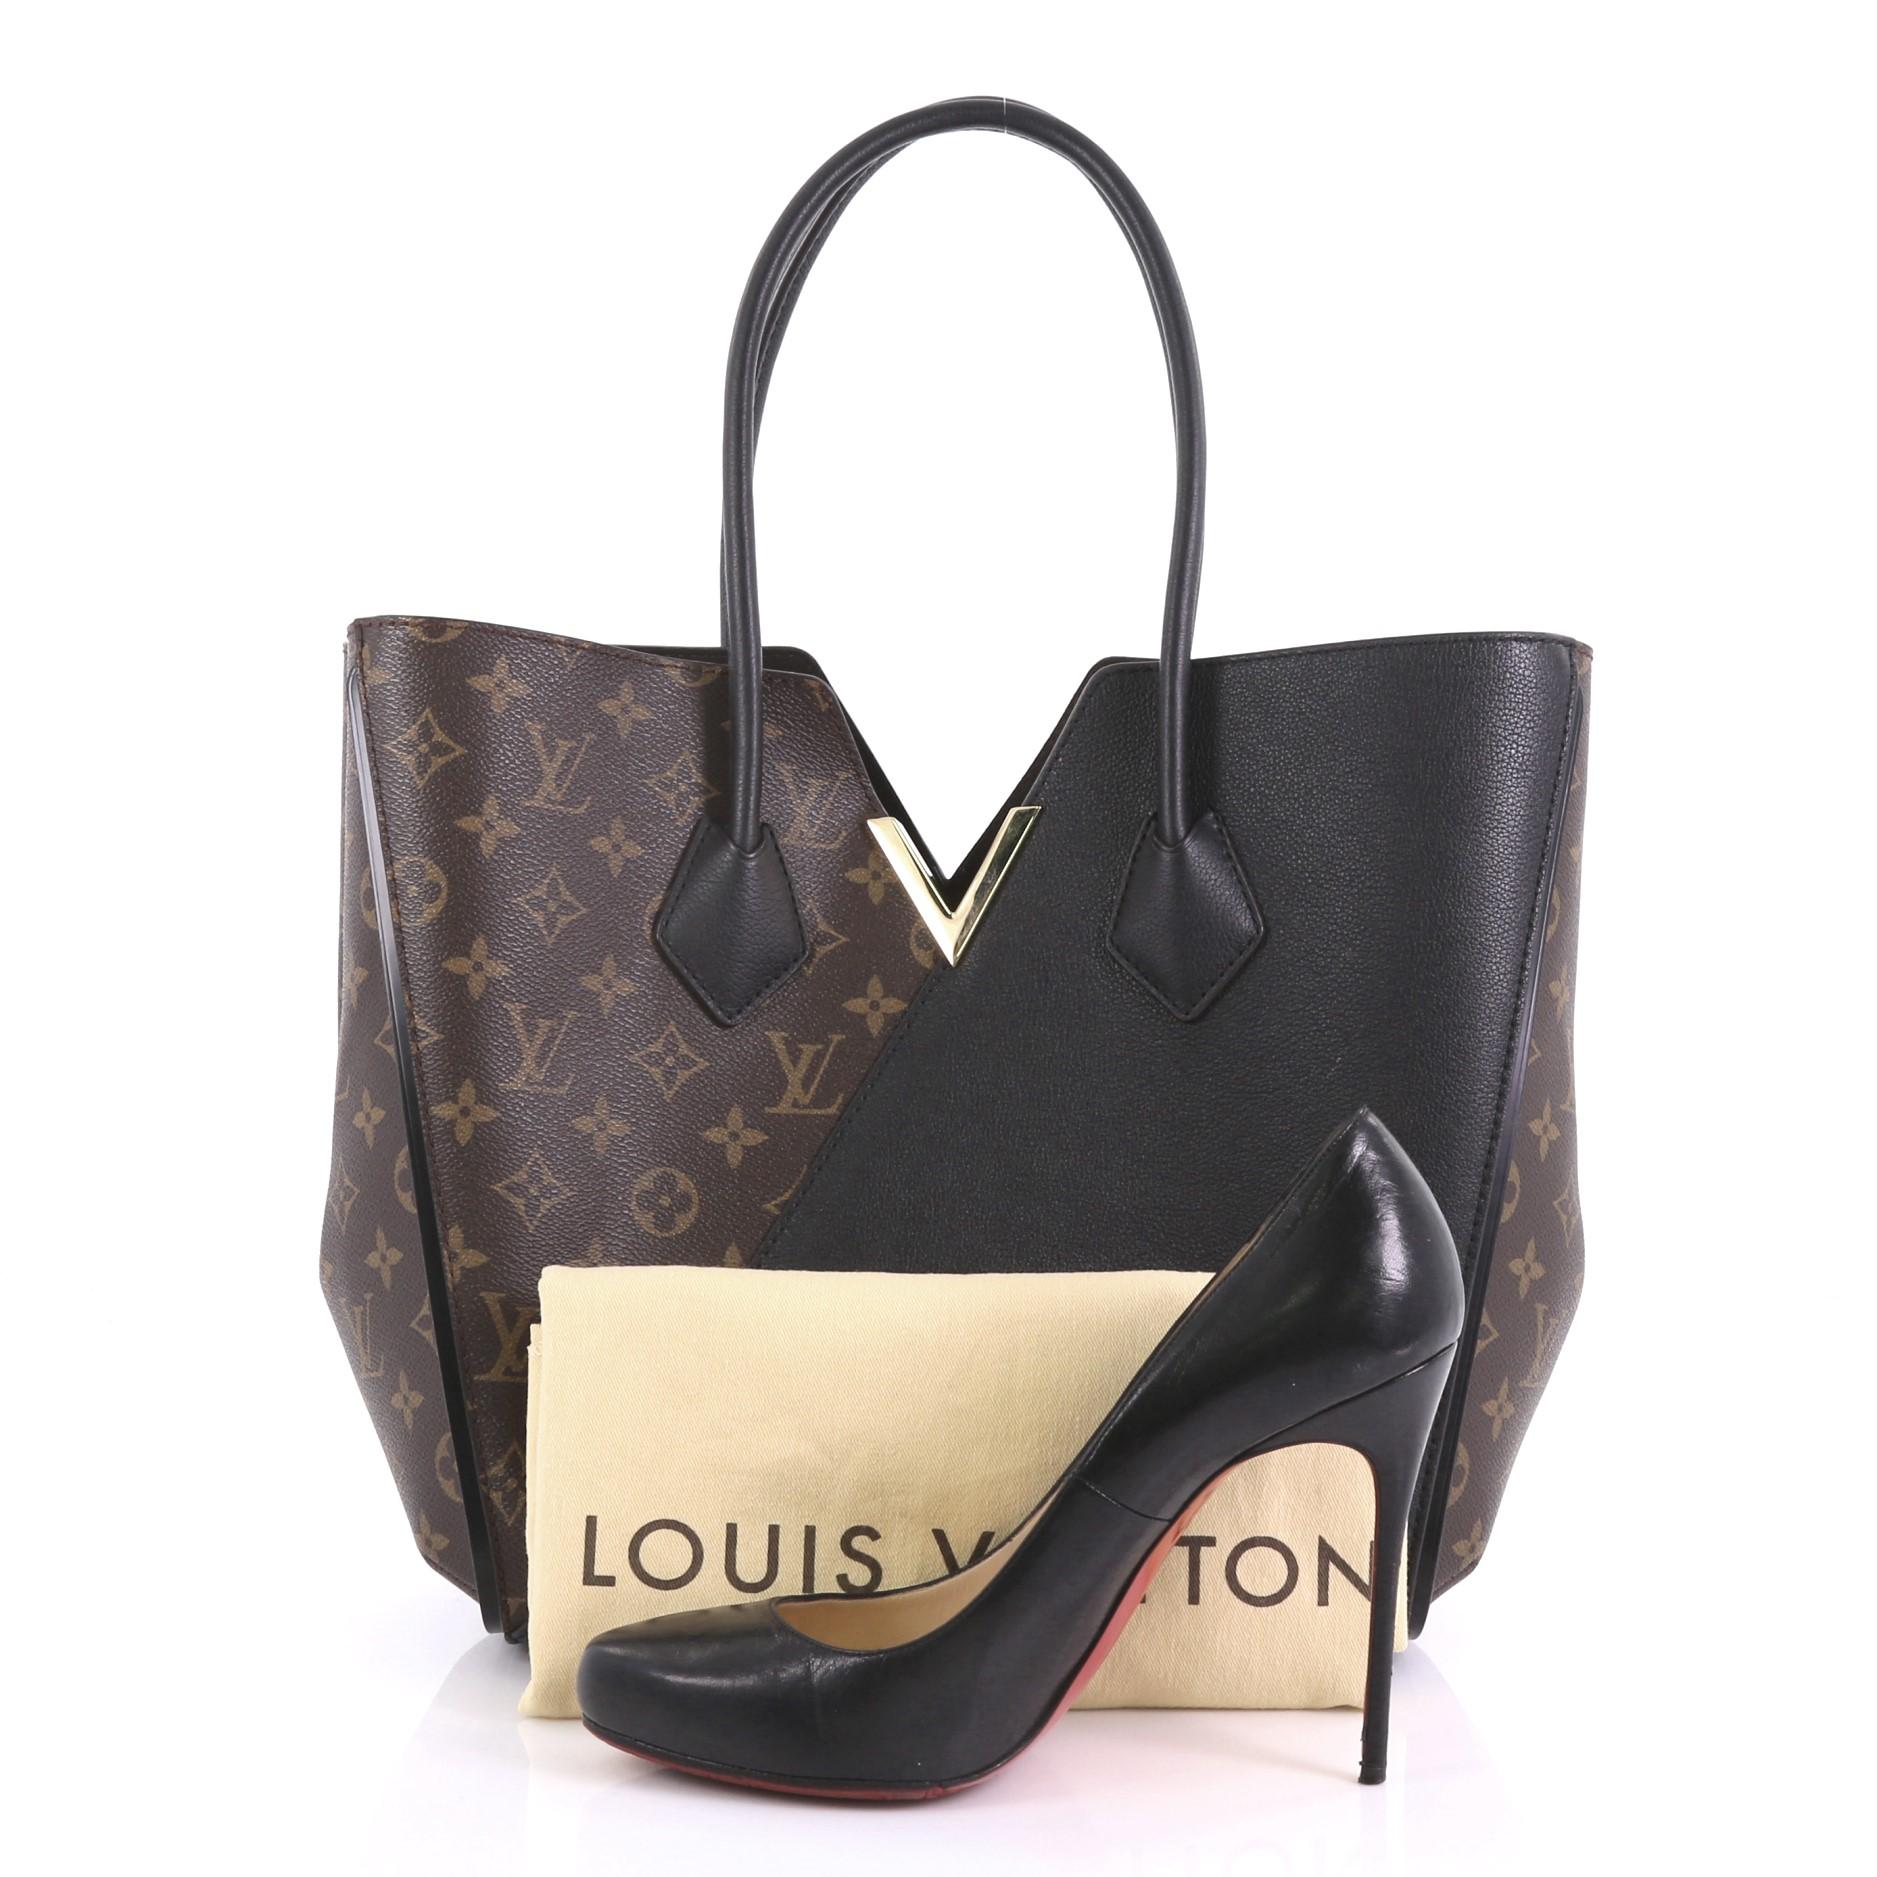 This Louis Vuitton Kimono Handbag Monogram Canvas and Leather MM, crafted from brown monogram canvas and black leather, features dual rolled top handles, a metallic V-cross accent, and gold-tone hardware. Its wide top with hook-clasp closure opens